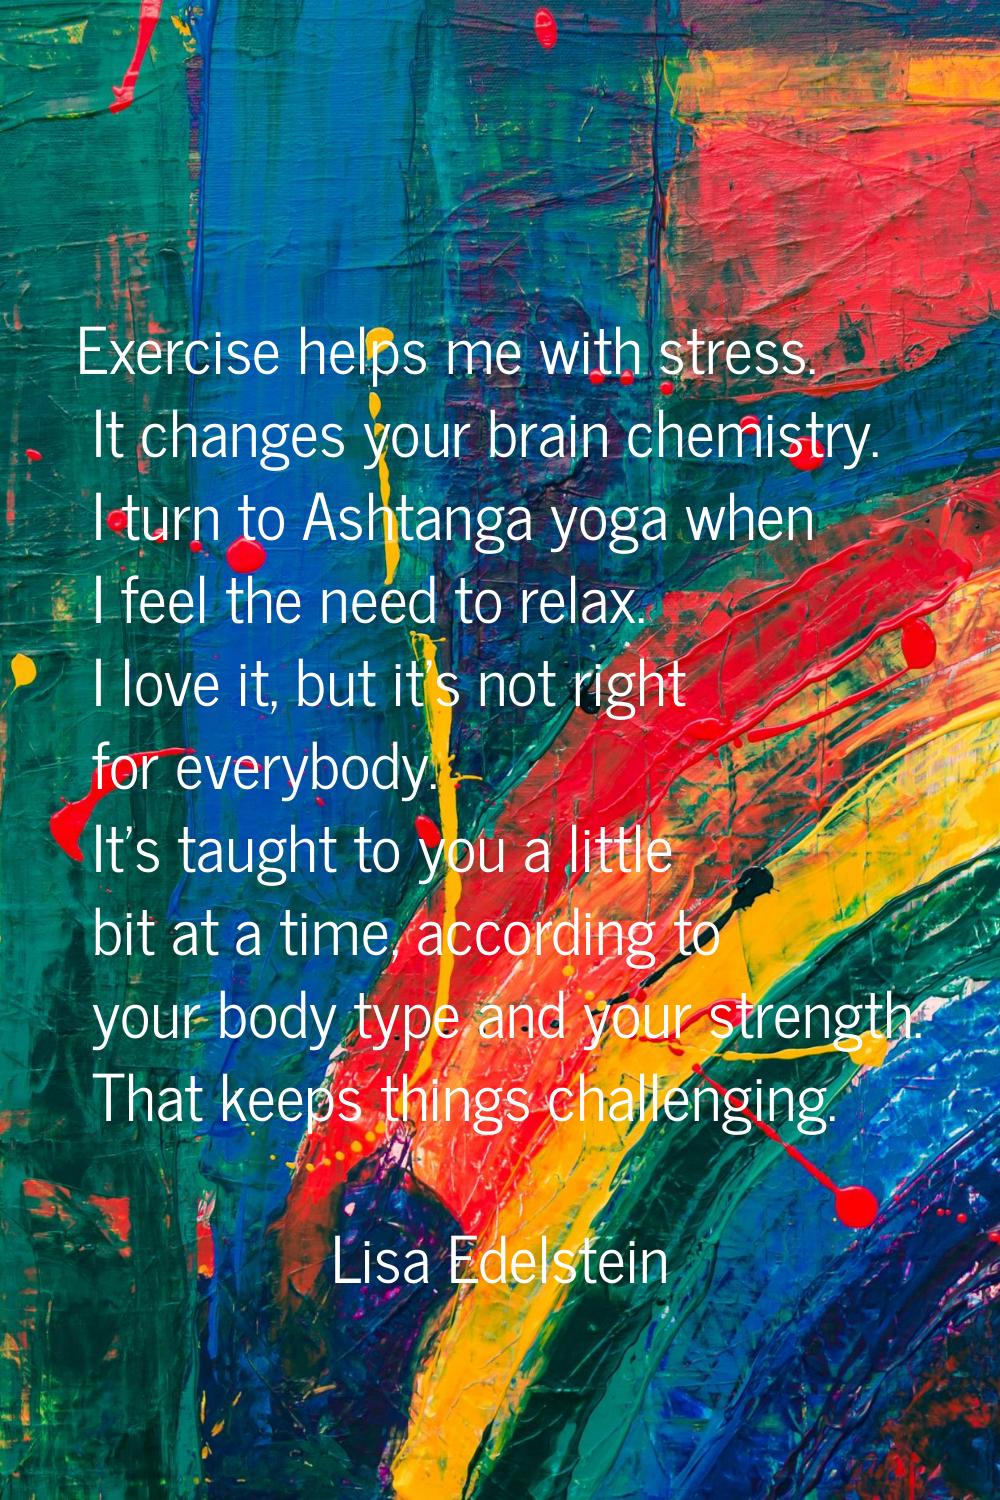 Exercise helps me with stress. It changes your brain chemistry. I turn to Ashtanga yoga when I feel